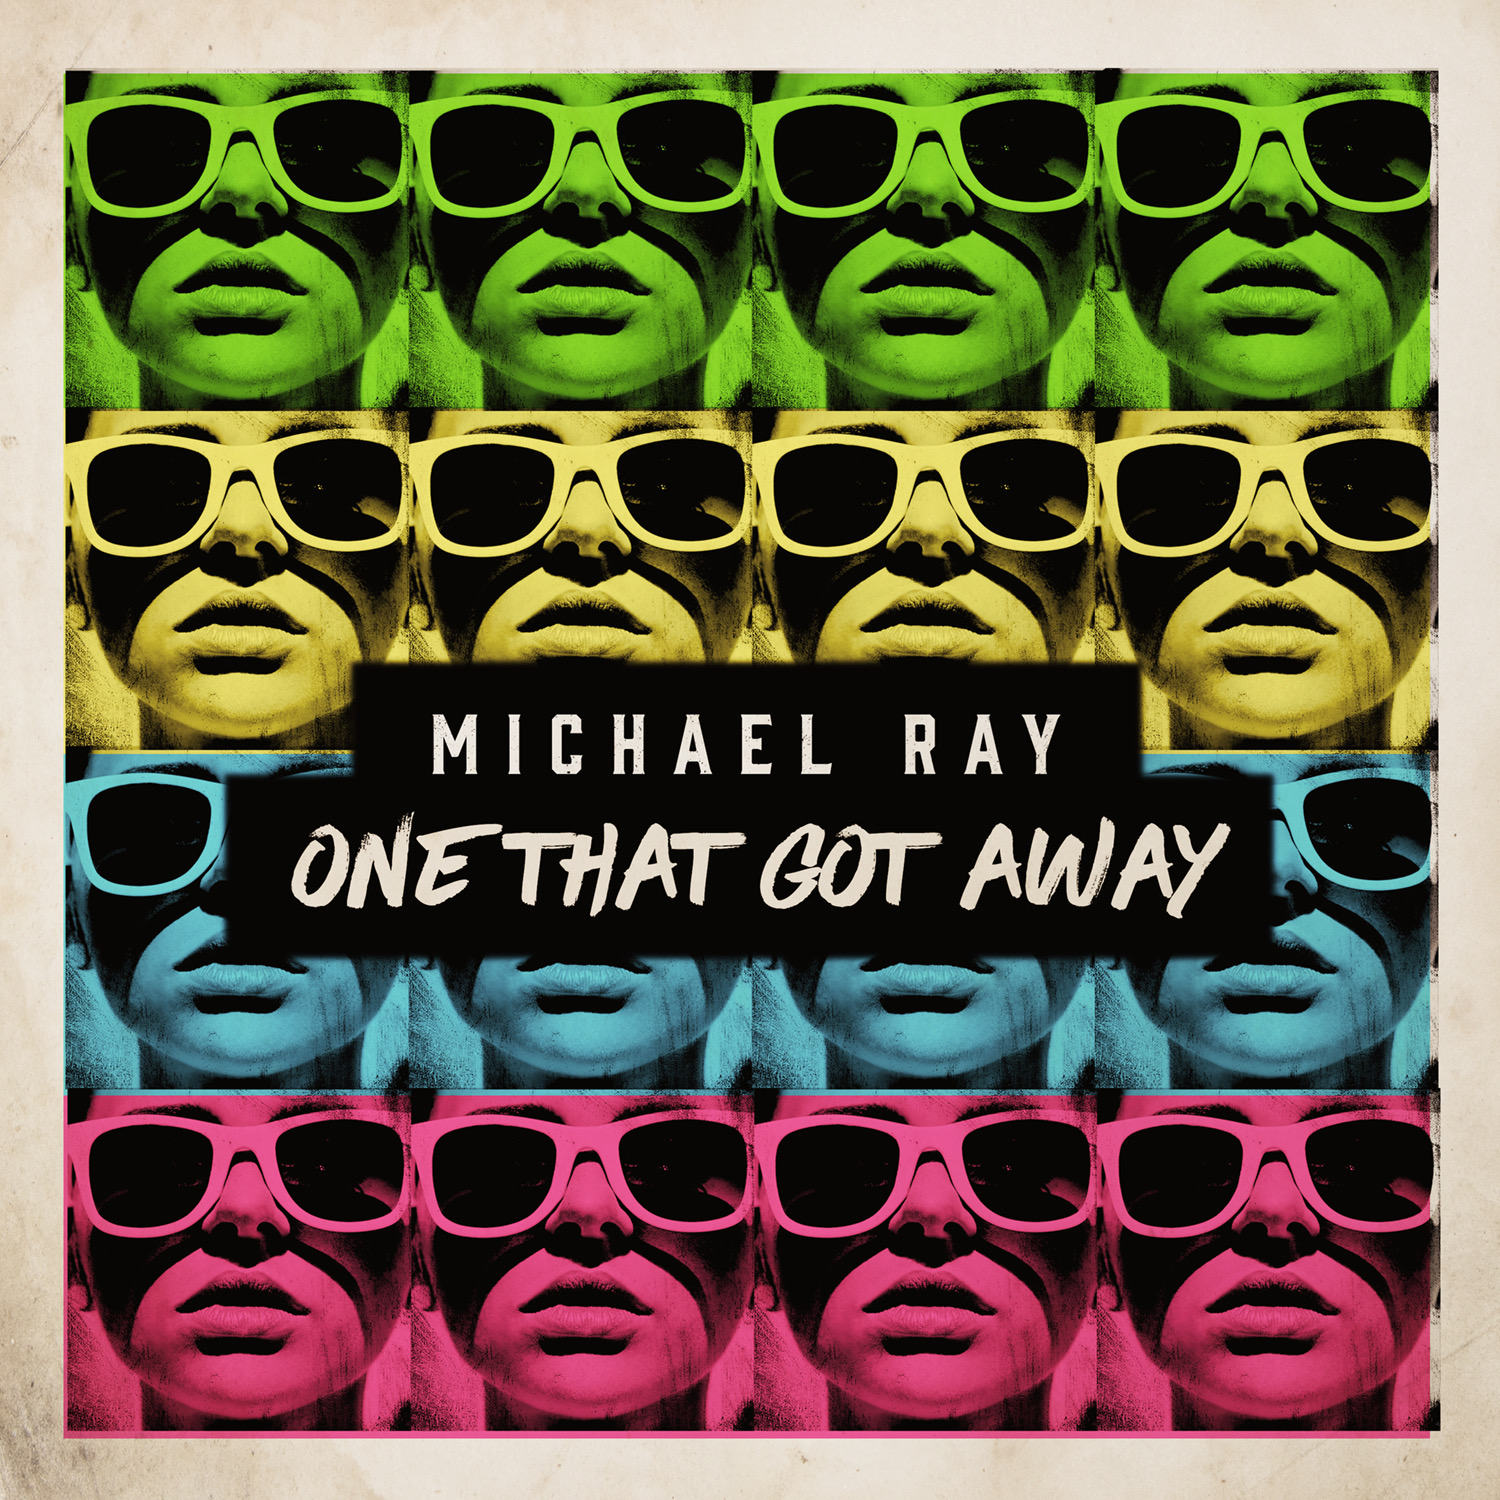 Michael Ray Opens Up About the “One That Got Away”